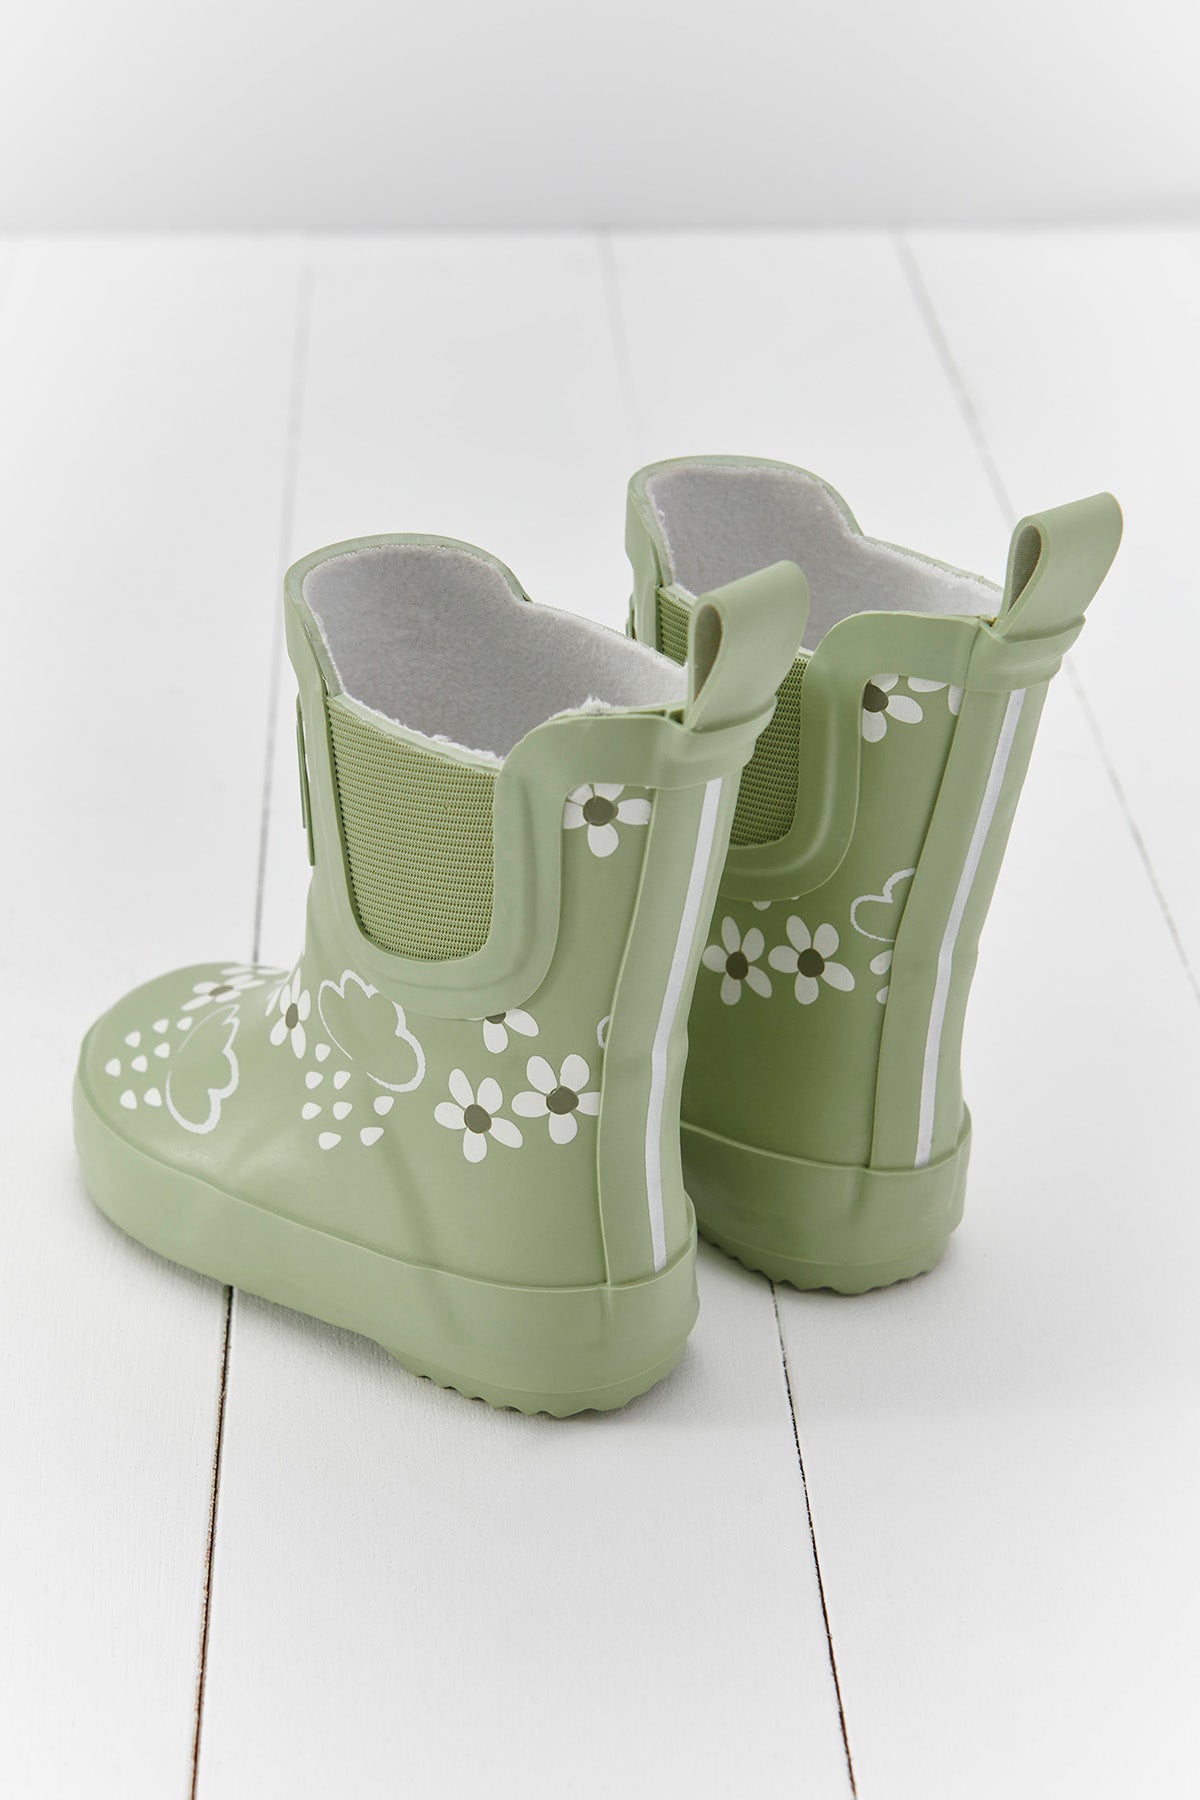 Spring Green Floral Short Colour-Changing Kids Wellies